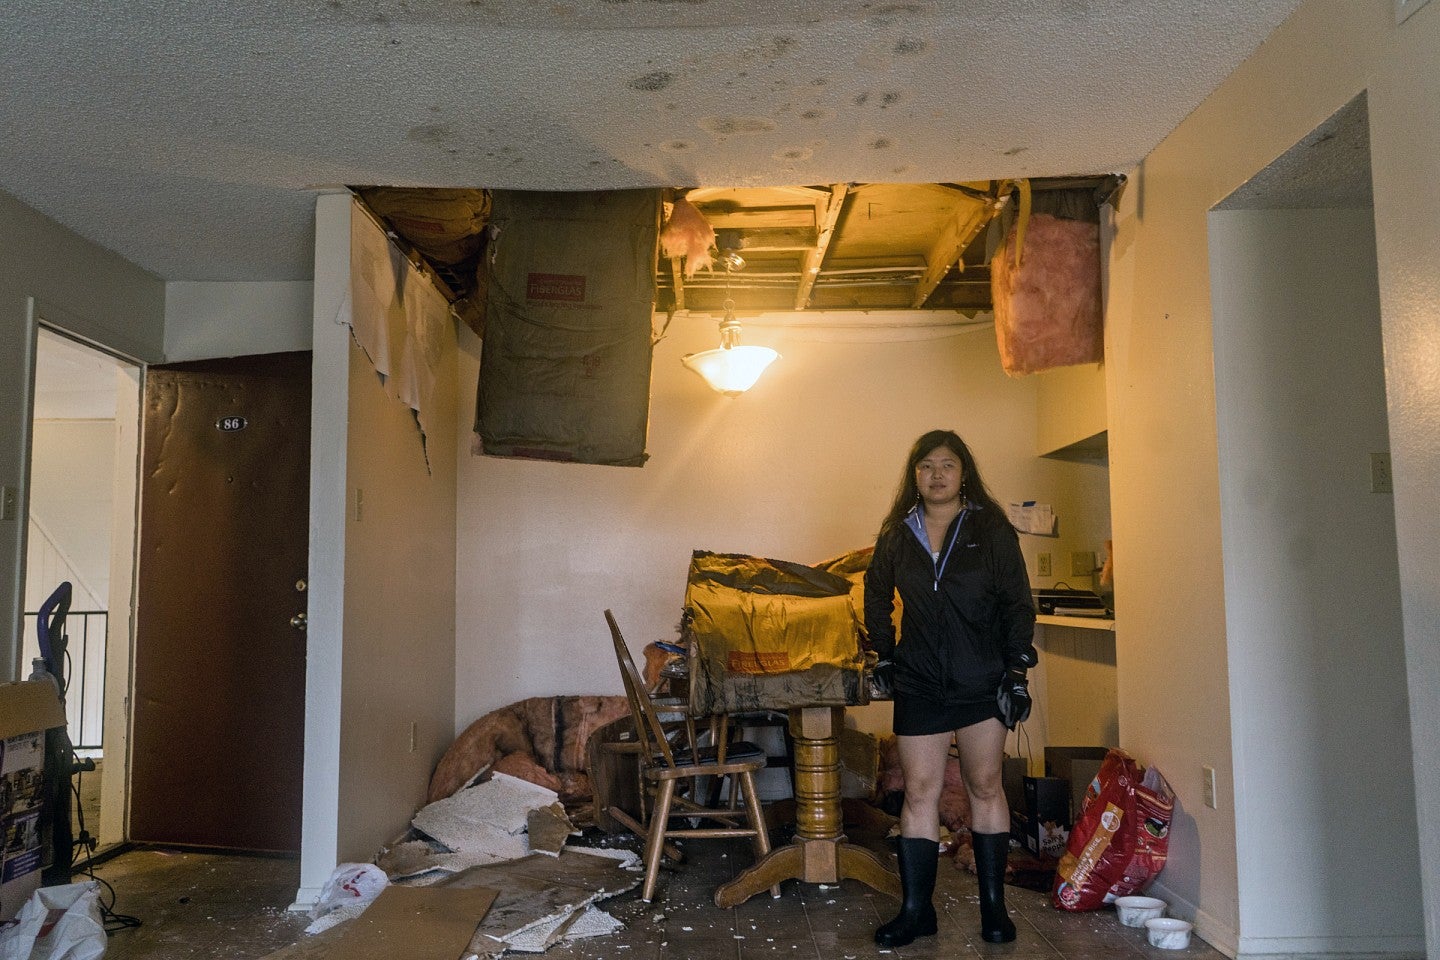 Kezia Setyawan stands in her ruined apartment building. The ceiling is damaged, with insulation falling onto the floor.